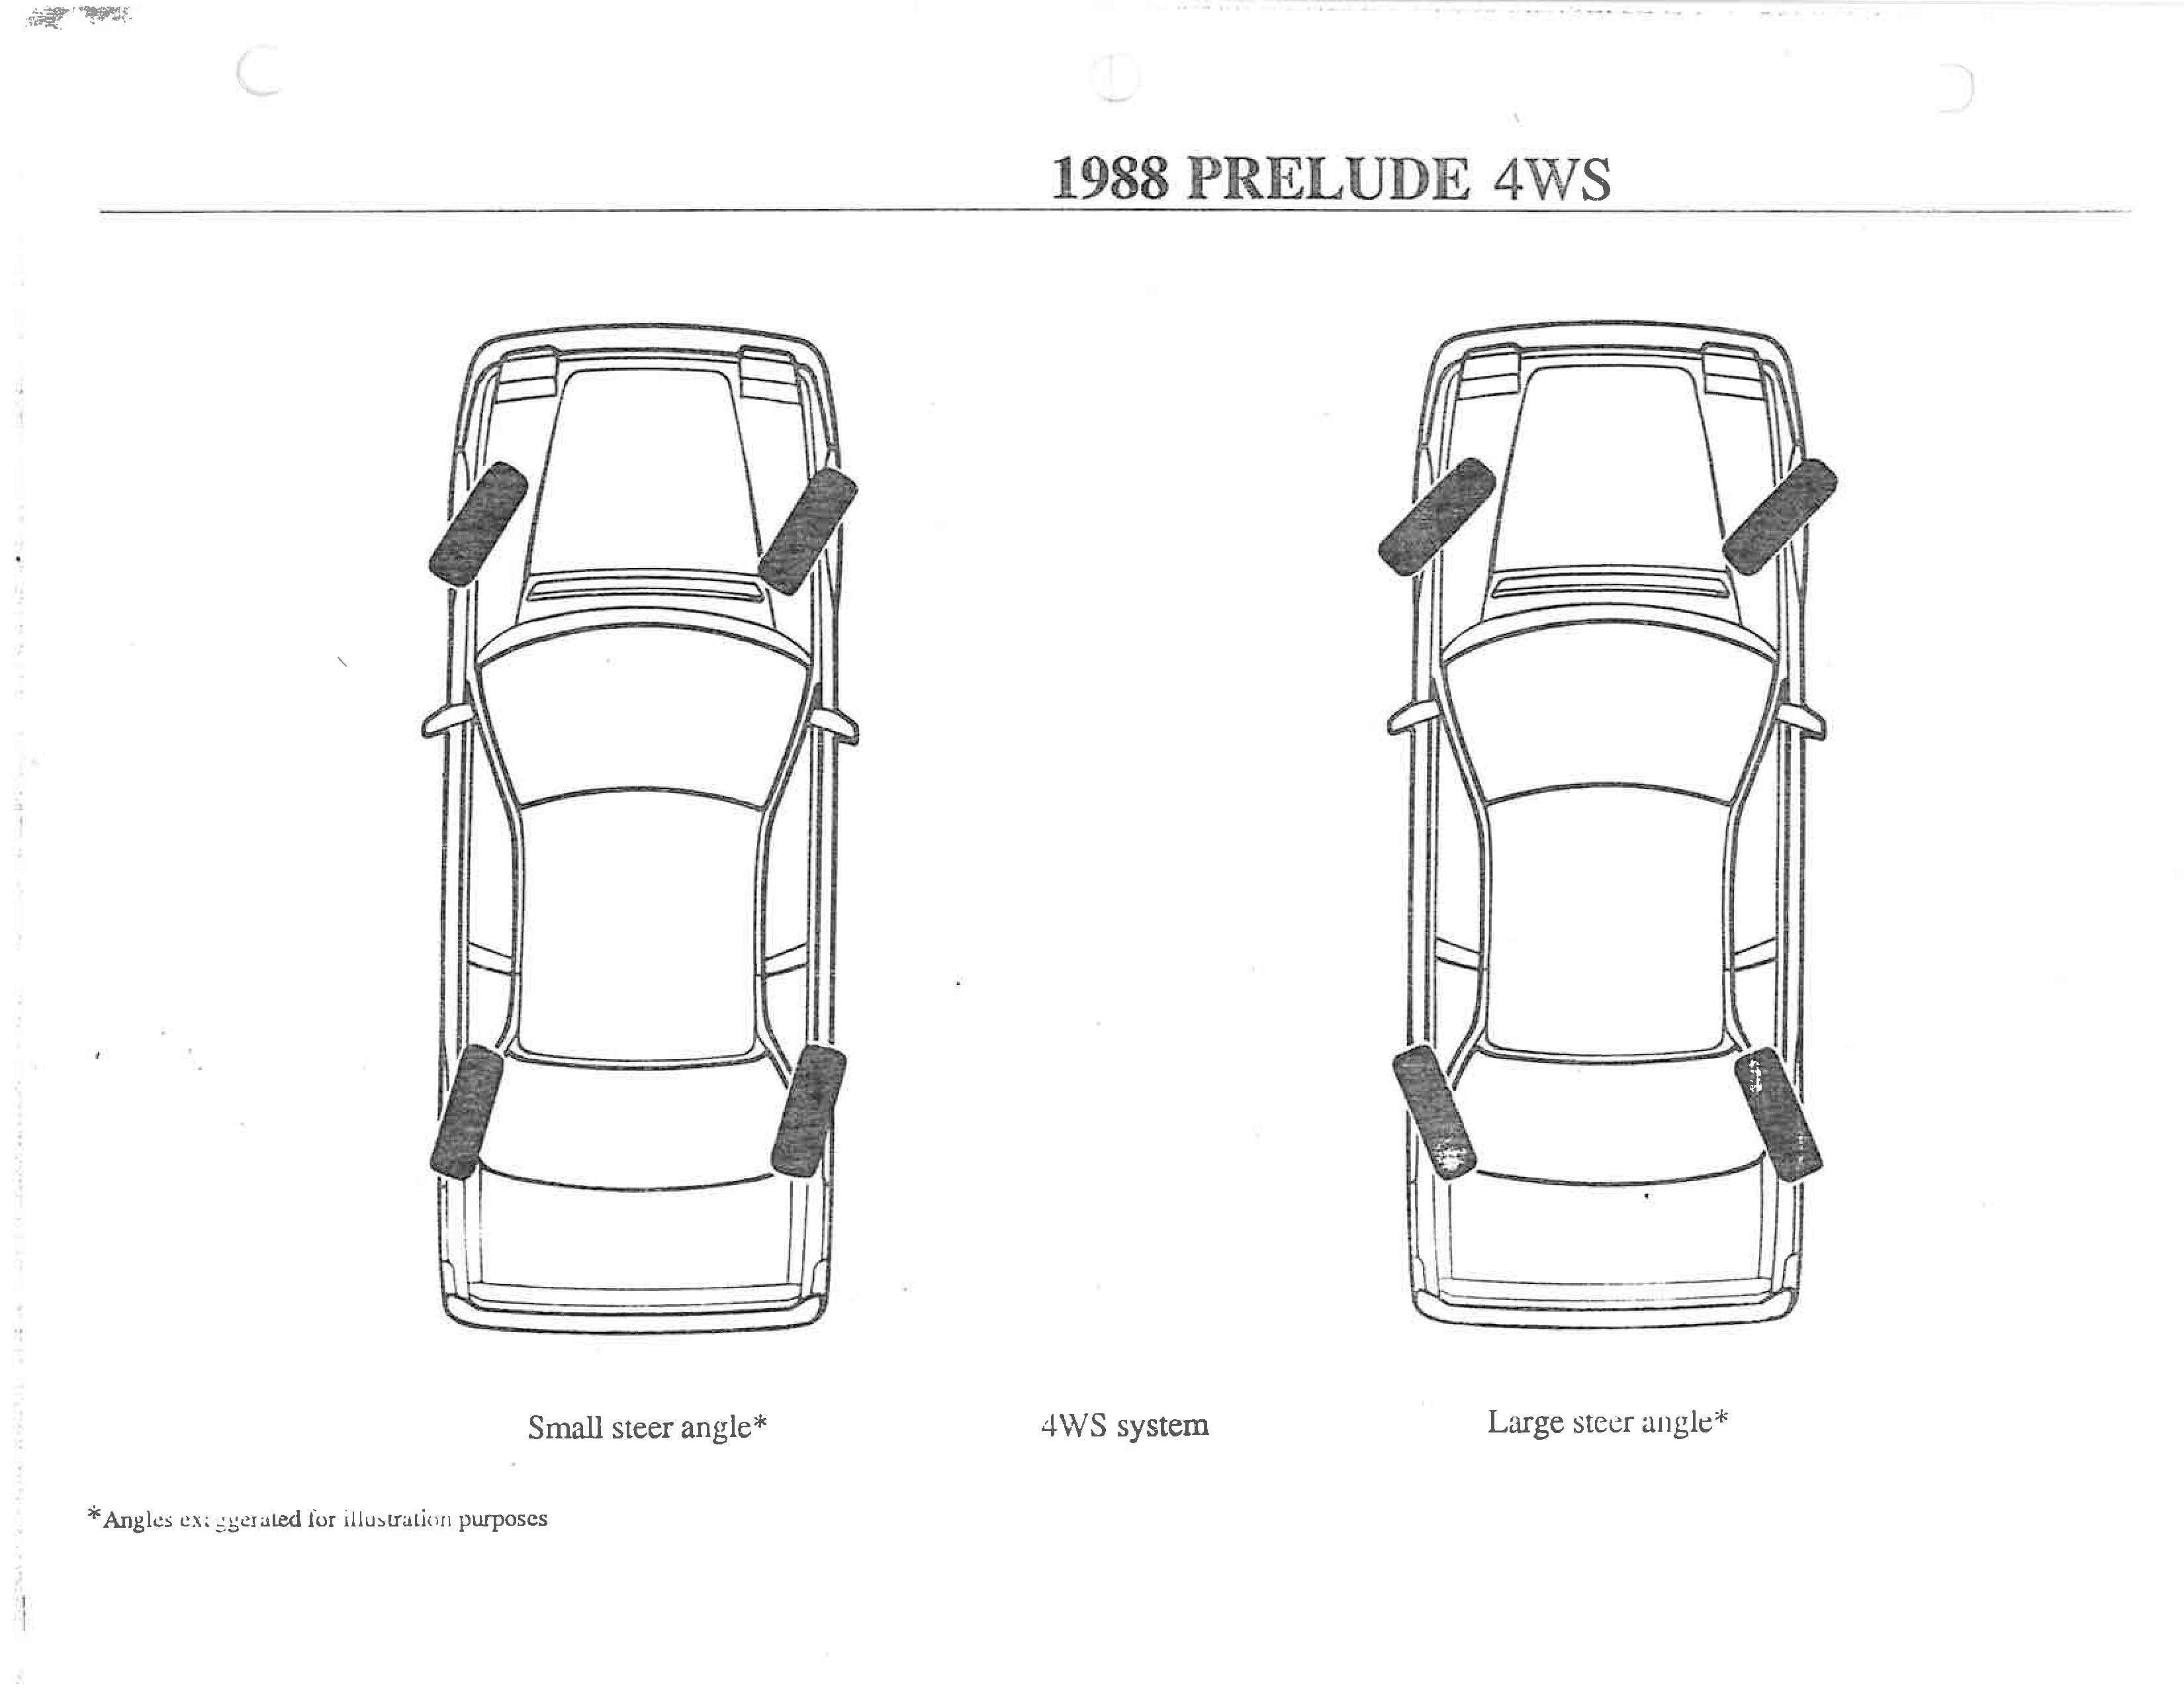 The engineering diagram for 4WS on the Honda Prelude Si.